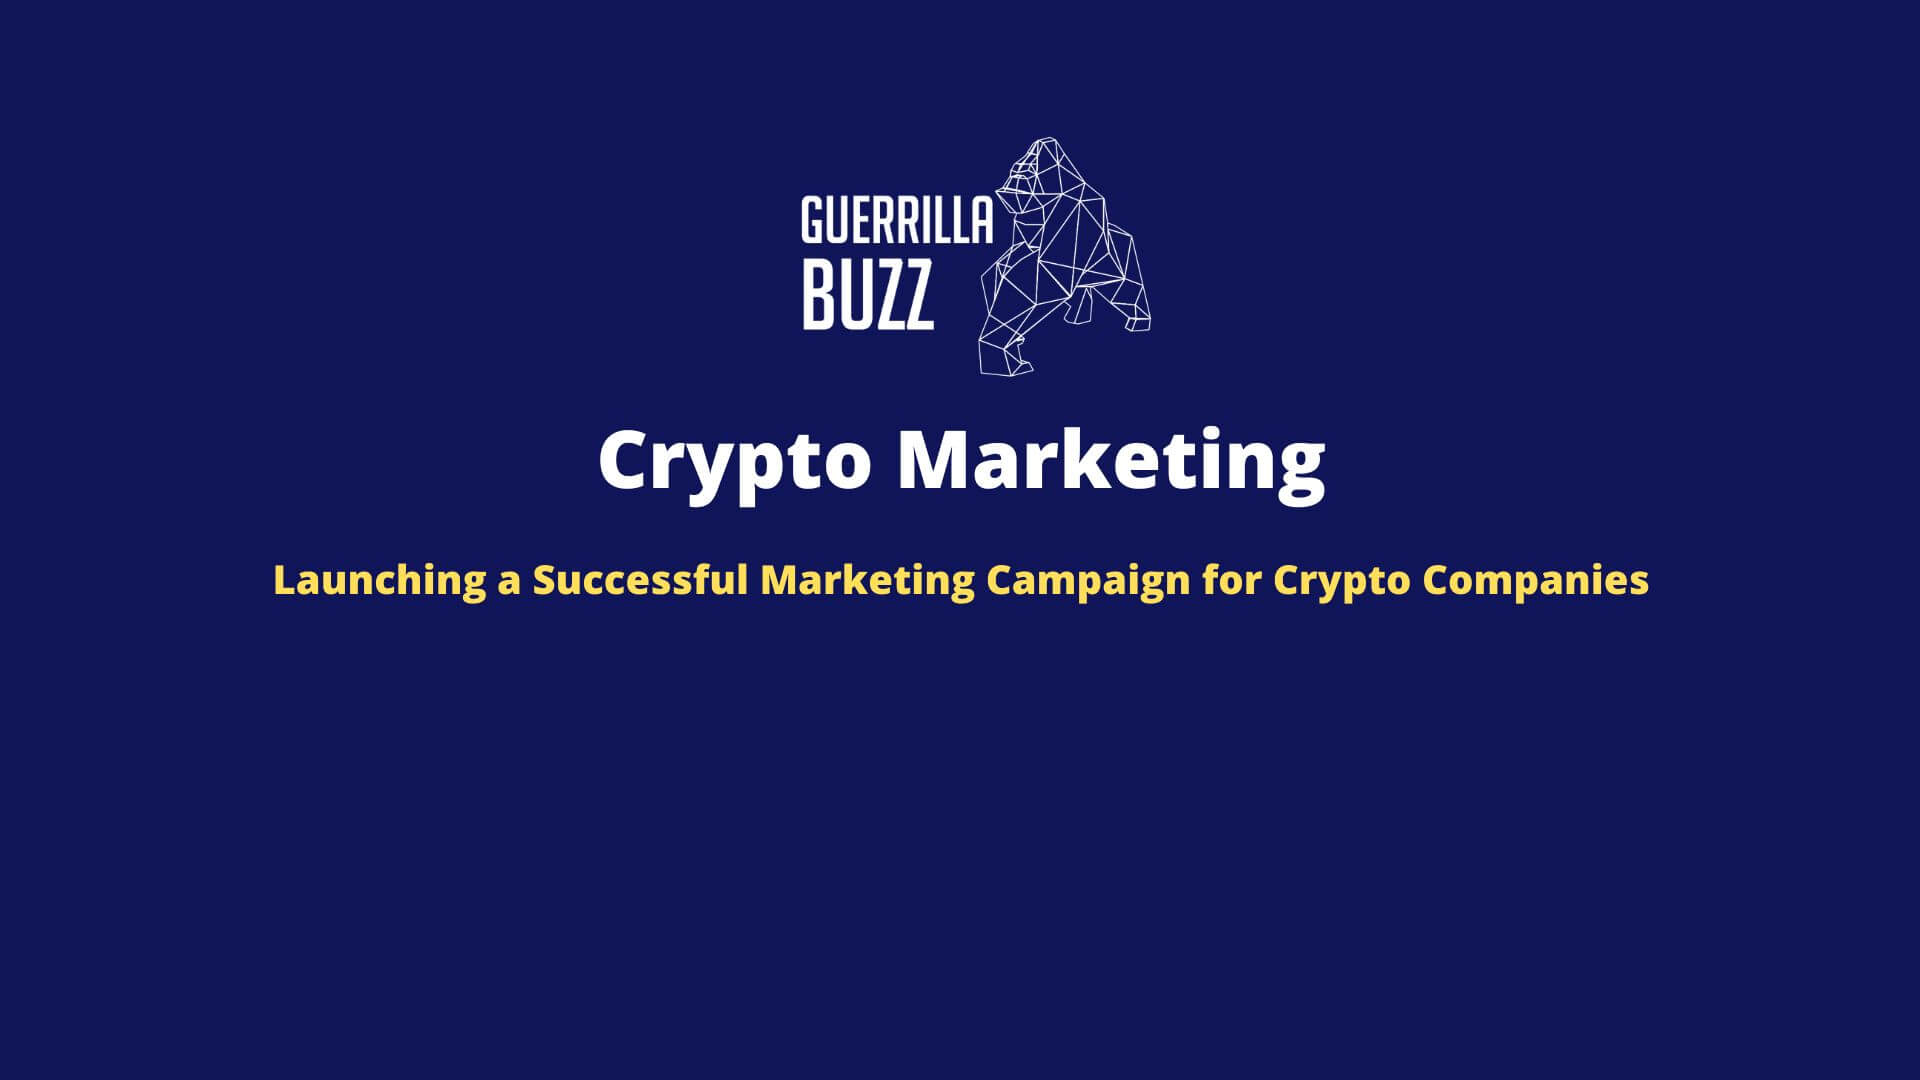 Crypto Marketing Guerrillabuzz Launching A Successful Marketing Campaign For Crypto Companies